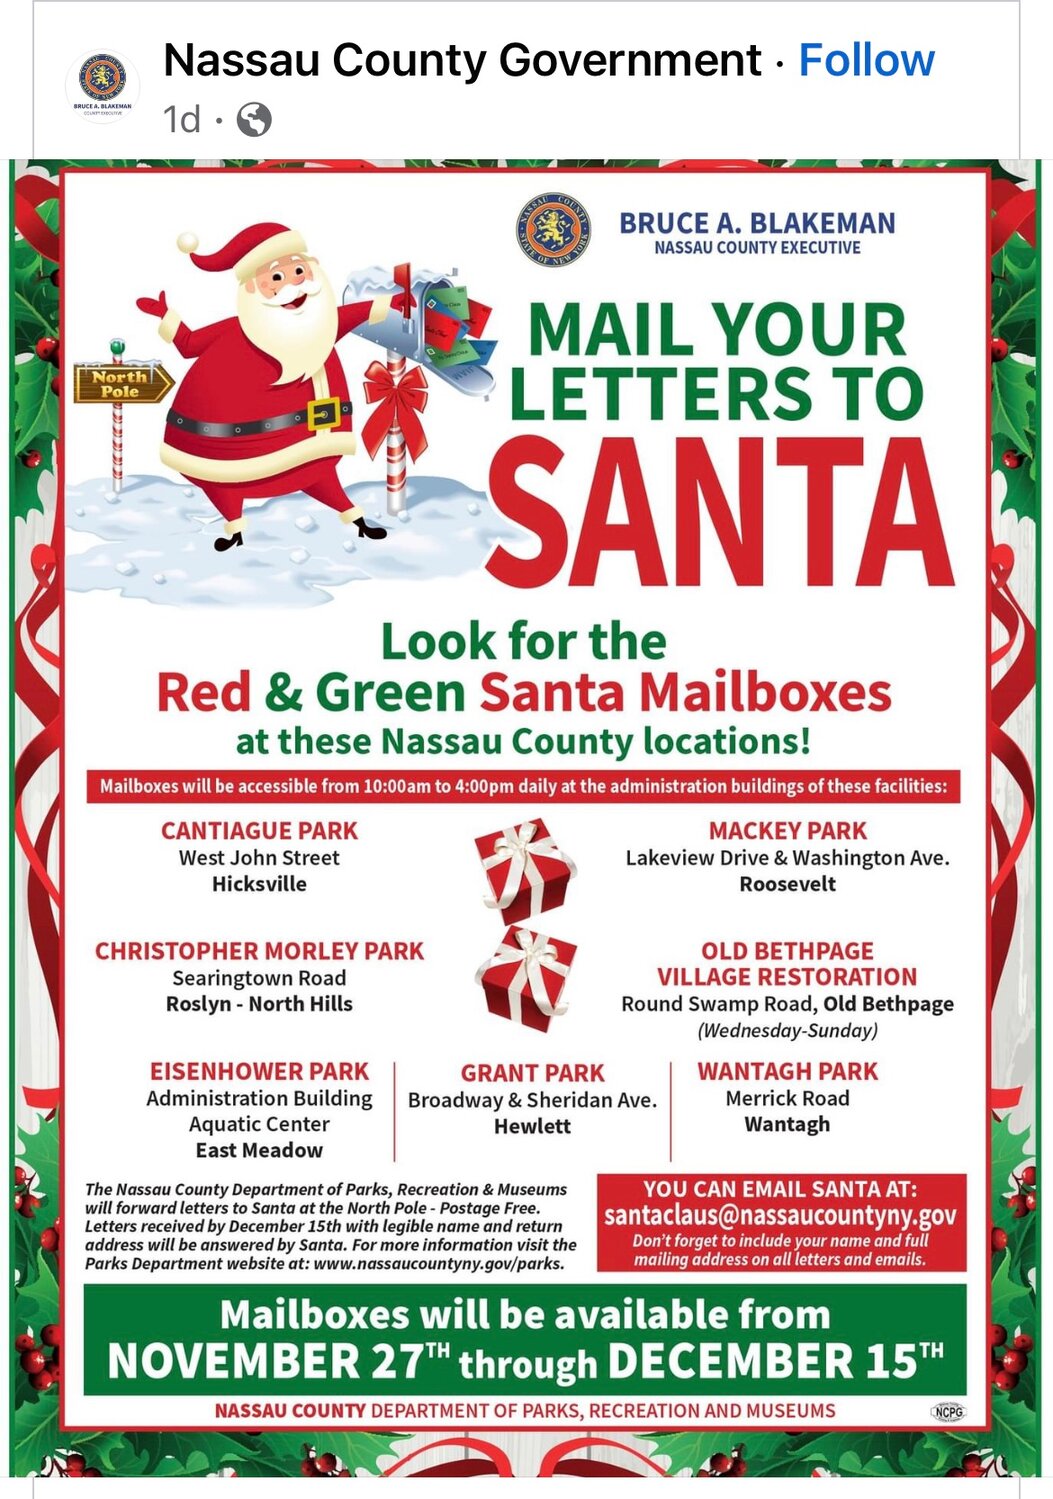 From Nov. 27 through Dec. 15, mail your letters to the jolly man in the red jacket at select Nassau County operated parks.